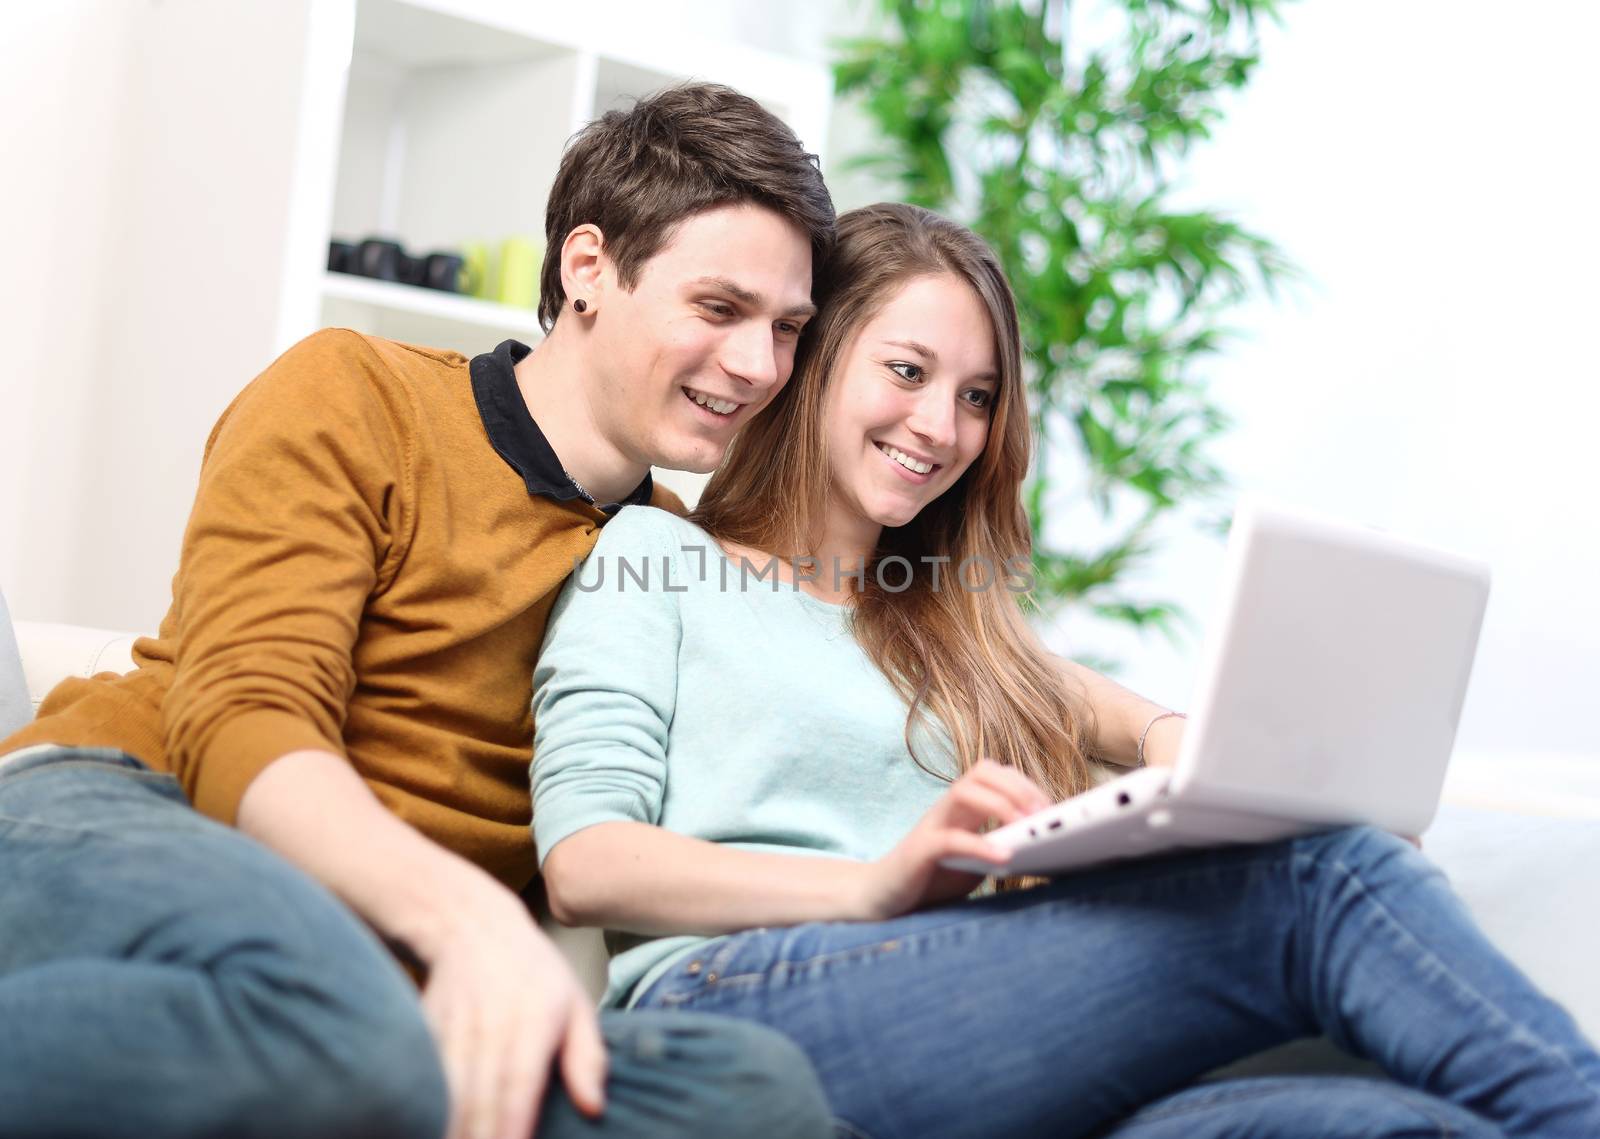 Portrait of a smiling young couple using laptop at home indoor by pixinoo